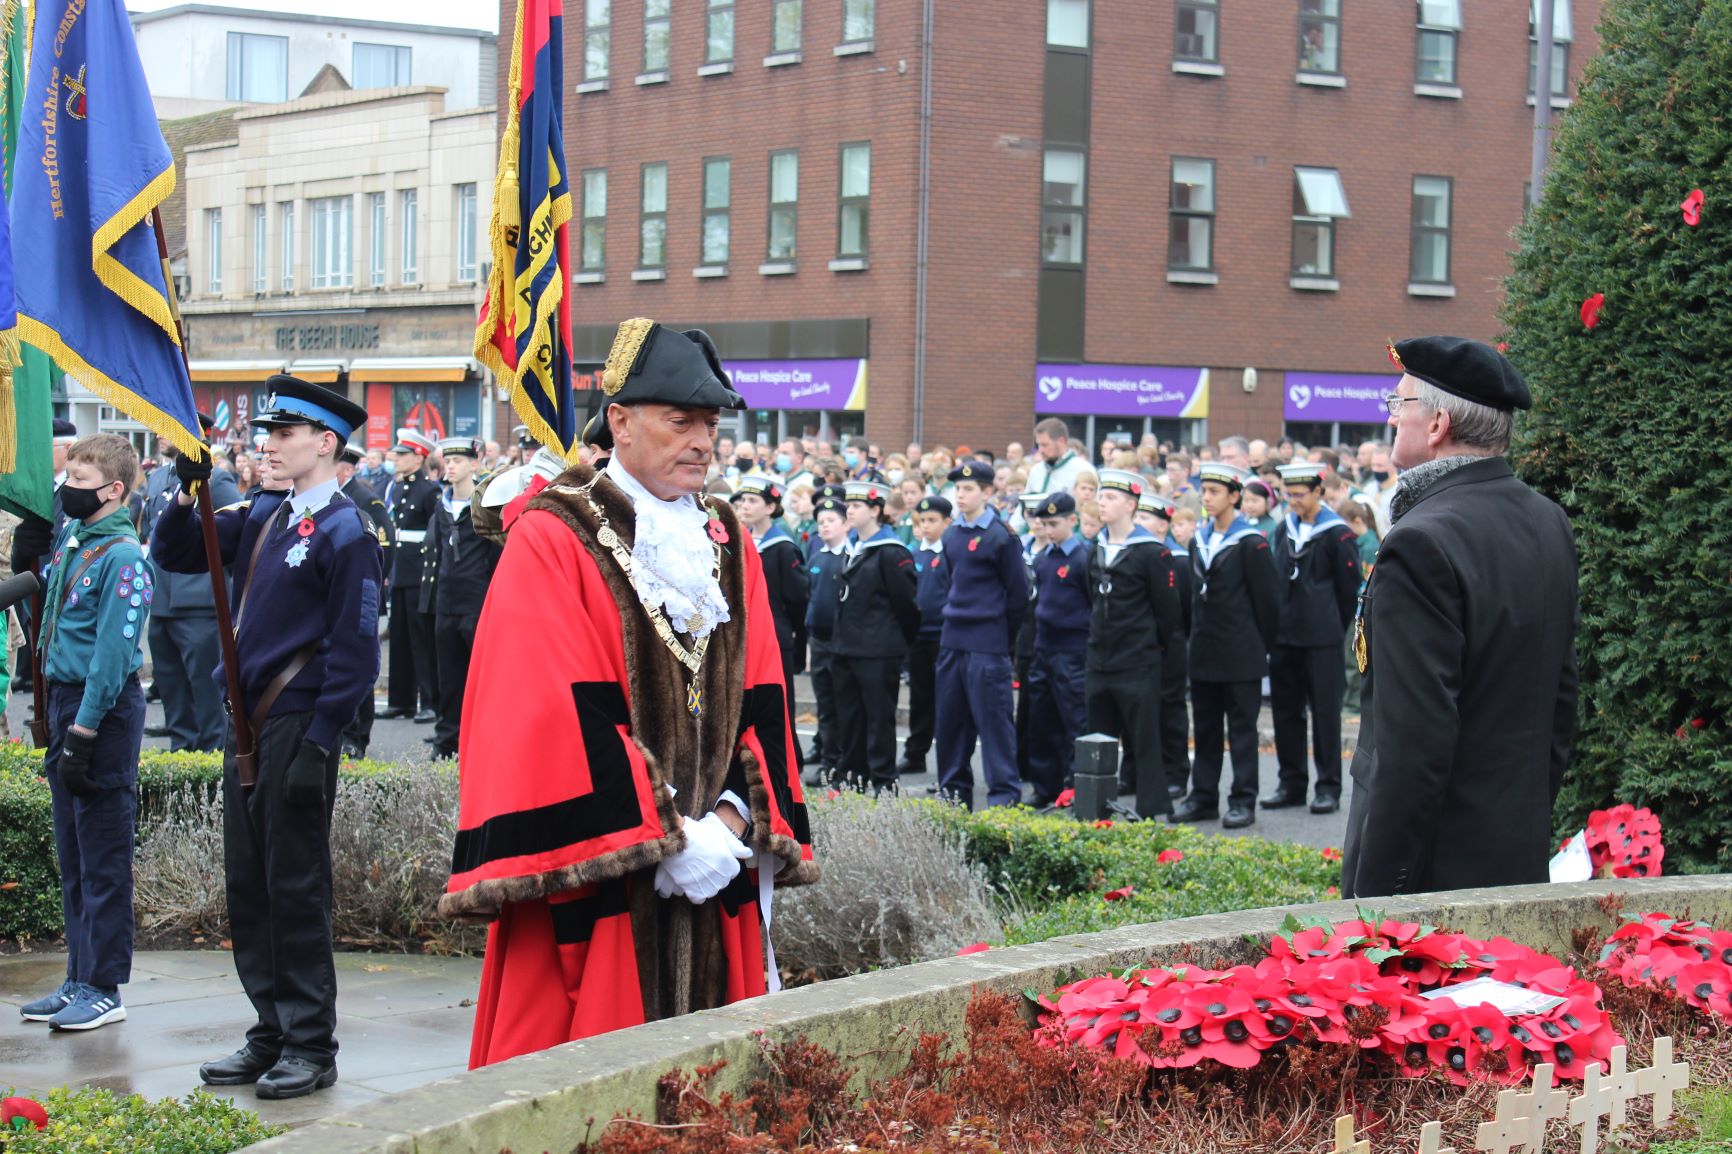 The Mayor laying a wreath